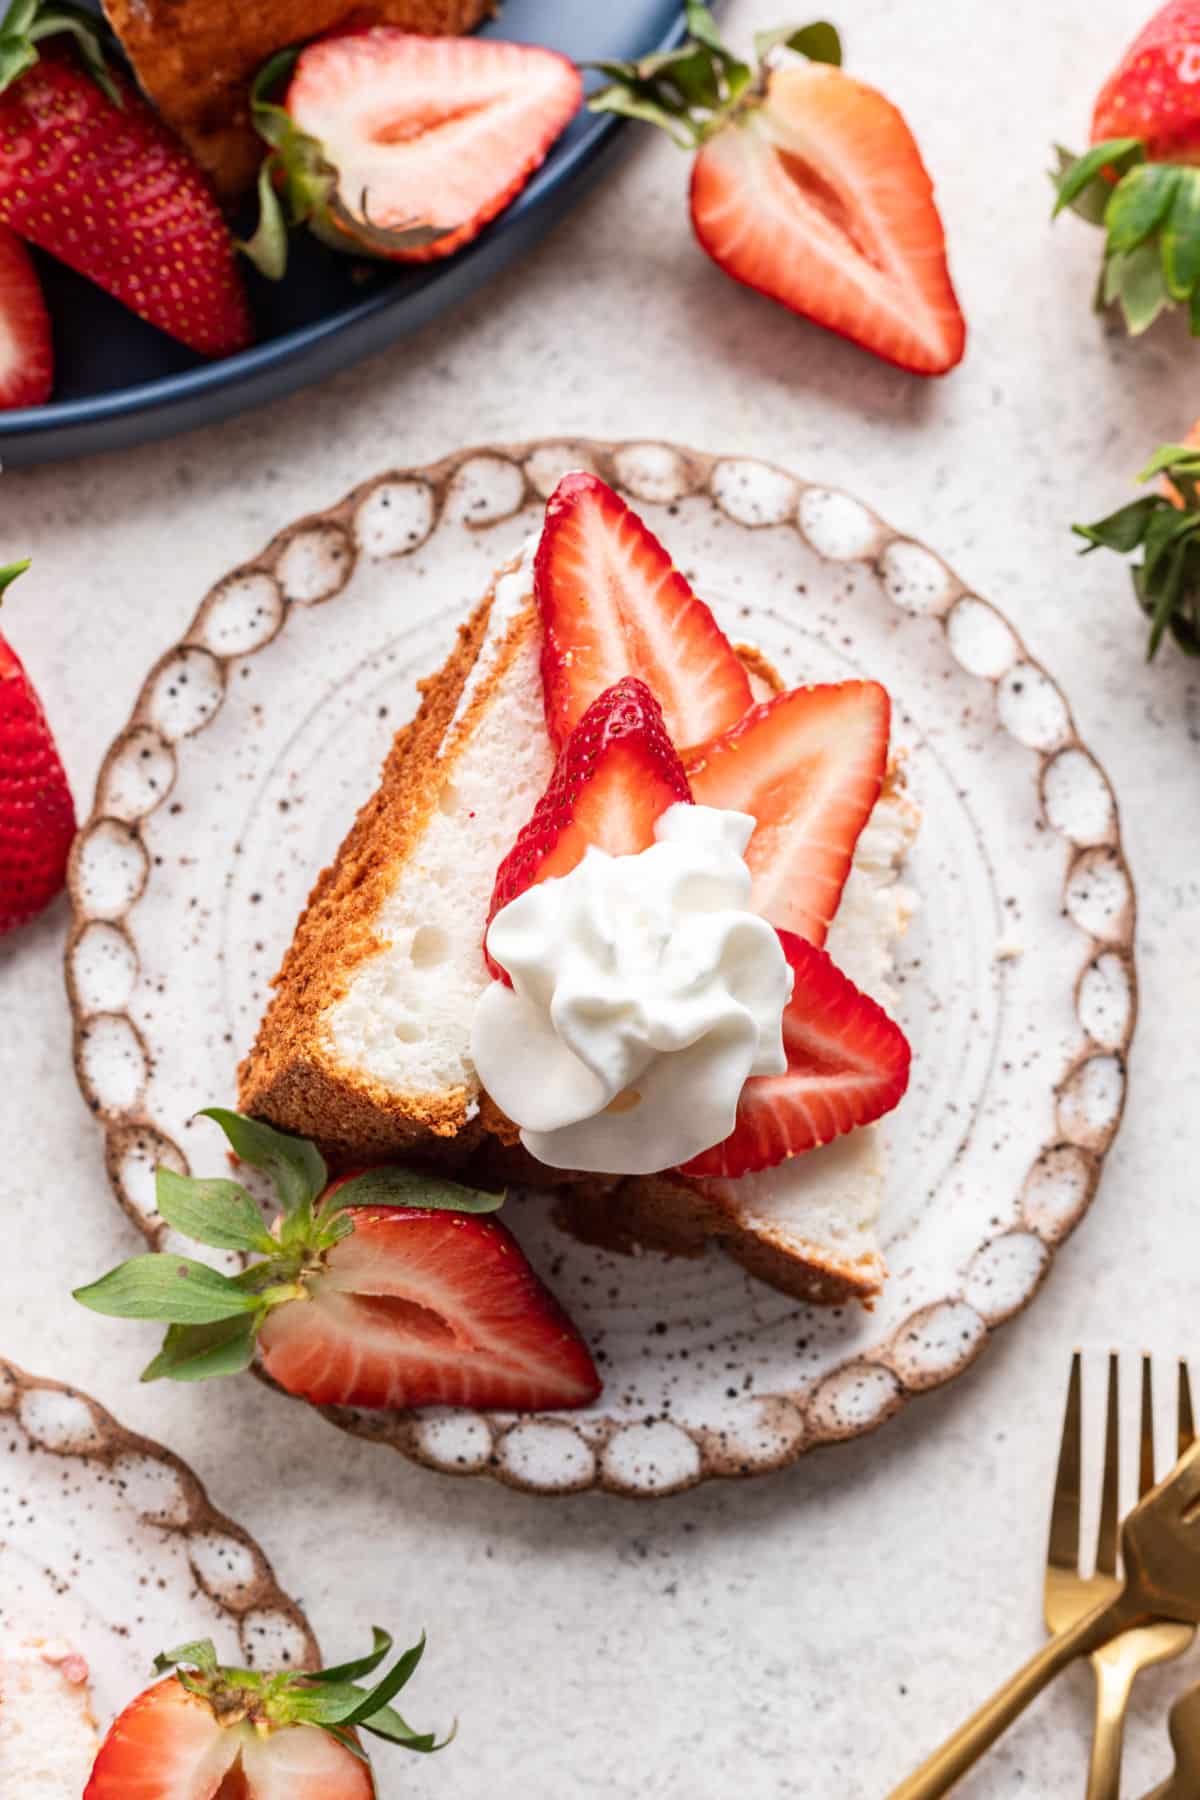 A plate with a slice of angel food cake topped with sliced strawberries and whipped cream.